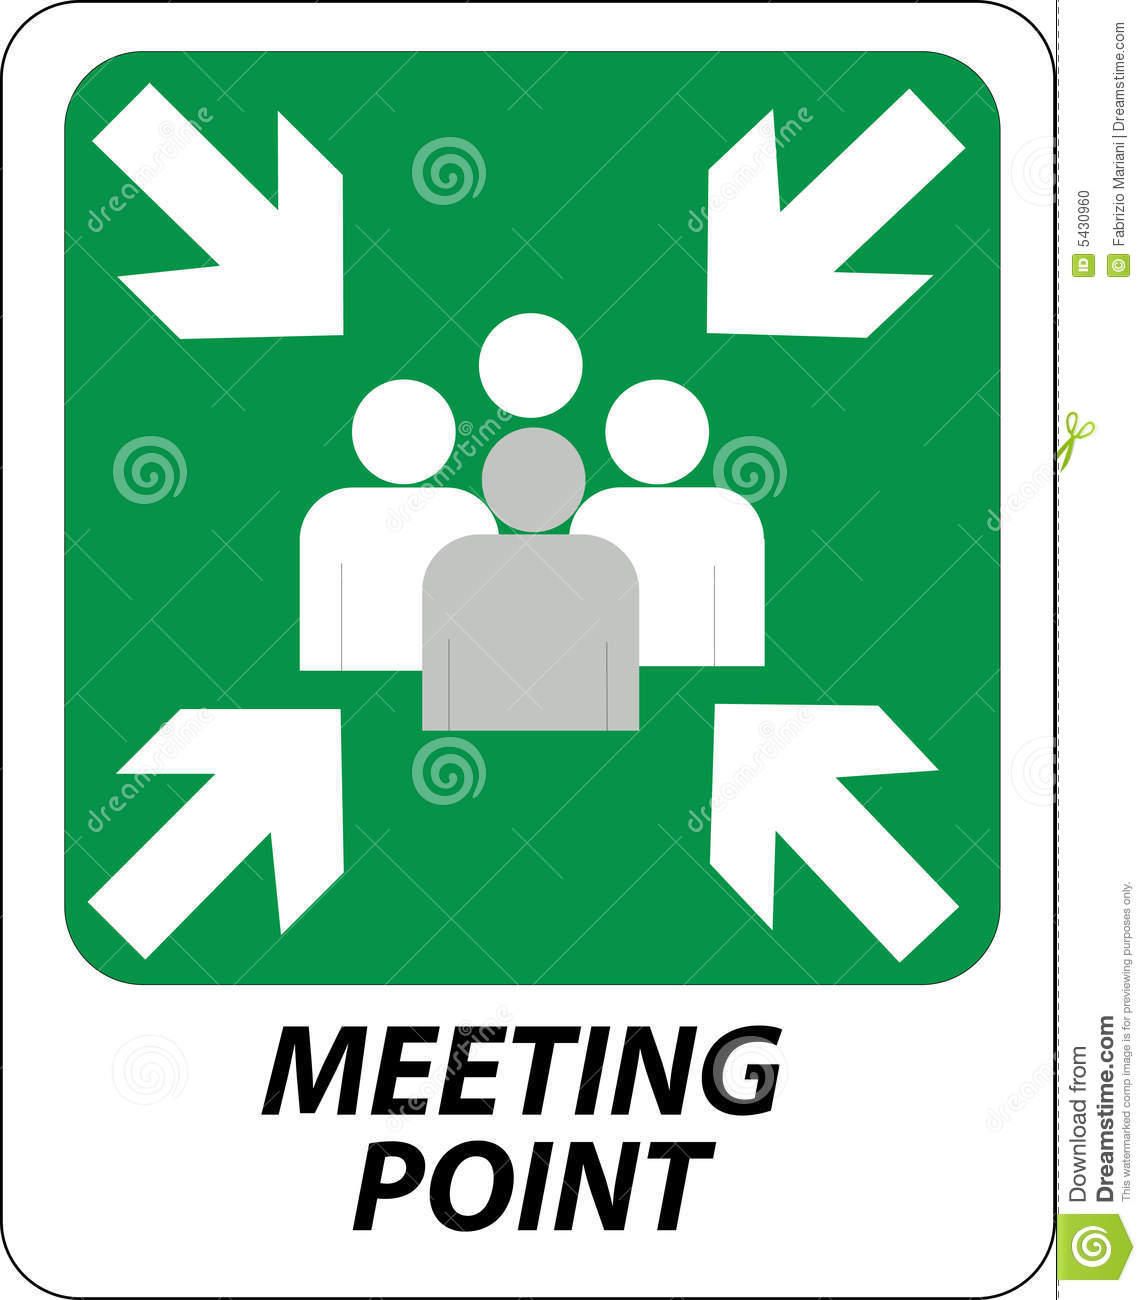 Meeting Point Sign Stock Photo   Image  5430960